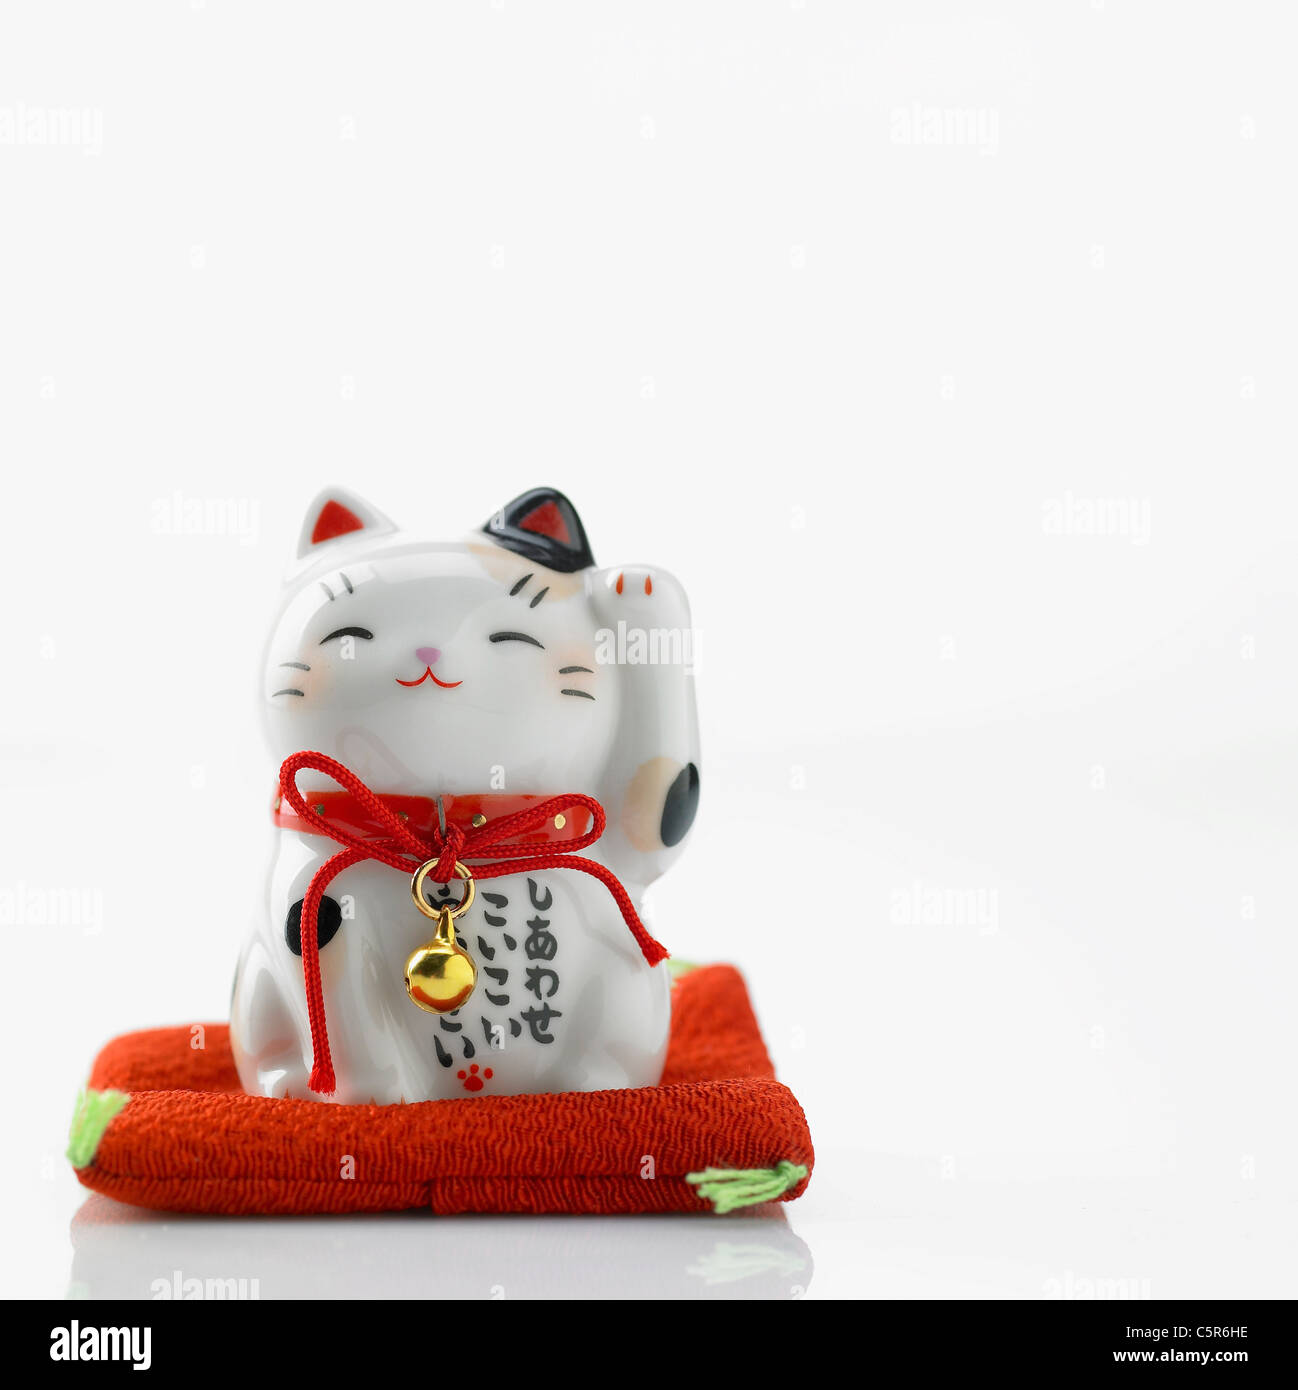 Japanese traditional lucky cat figurine Stock Photo